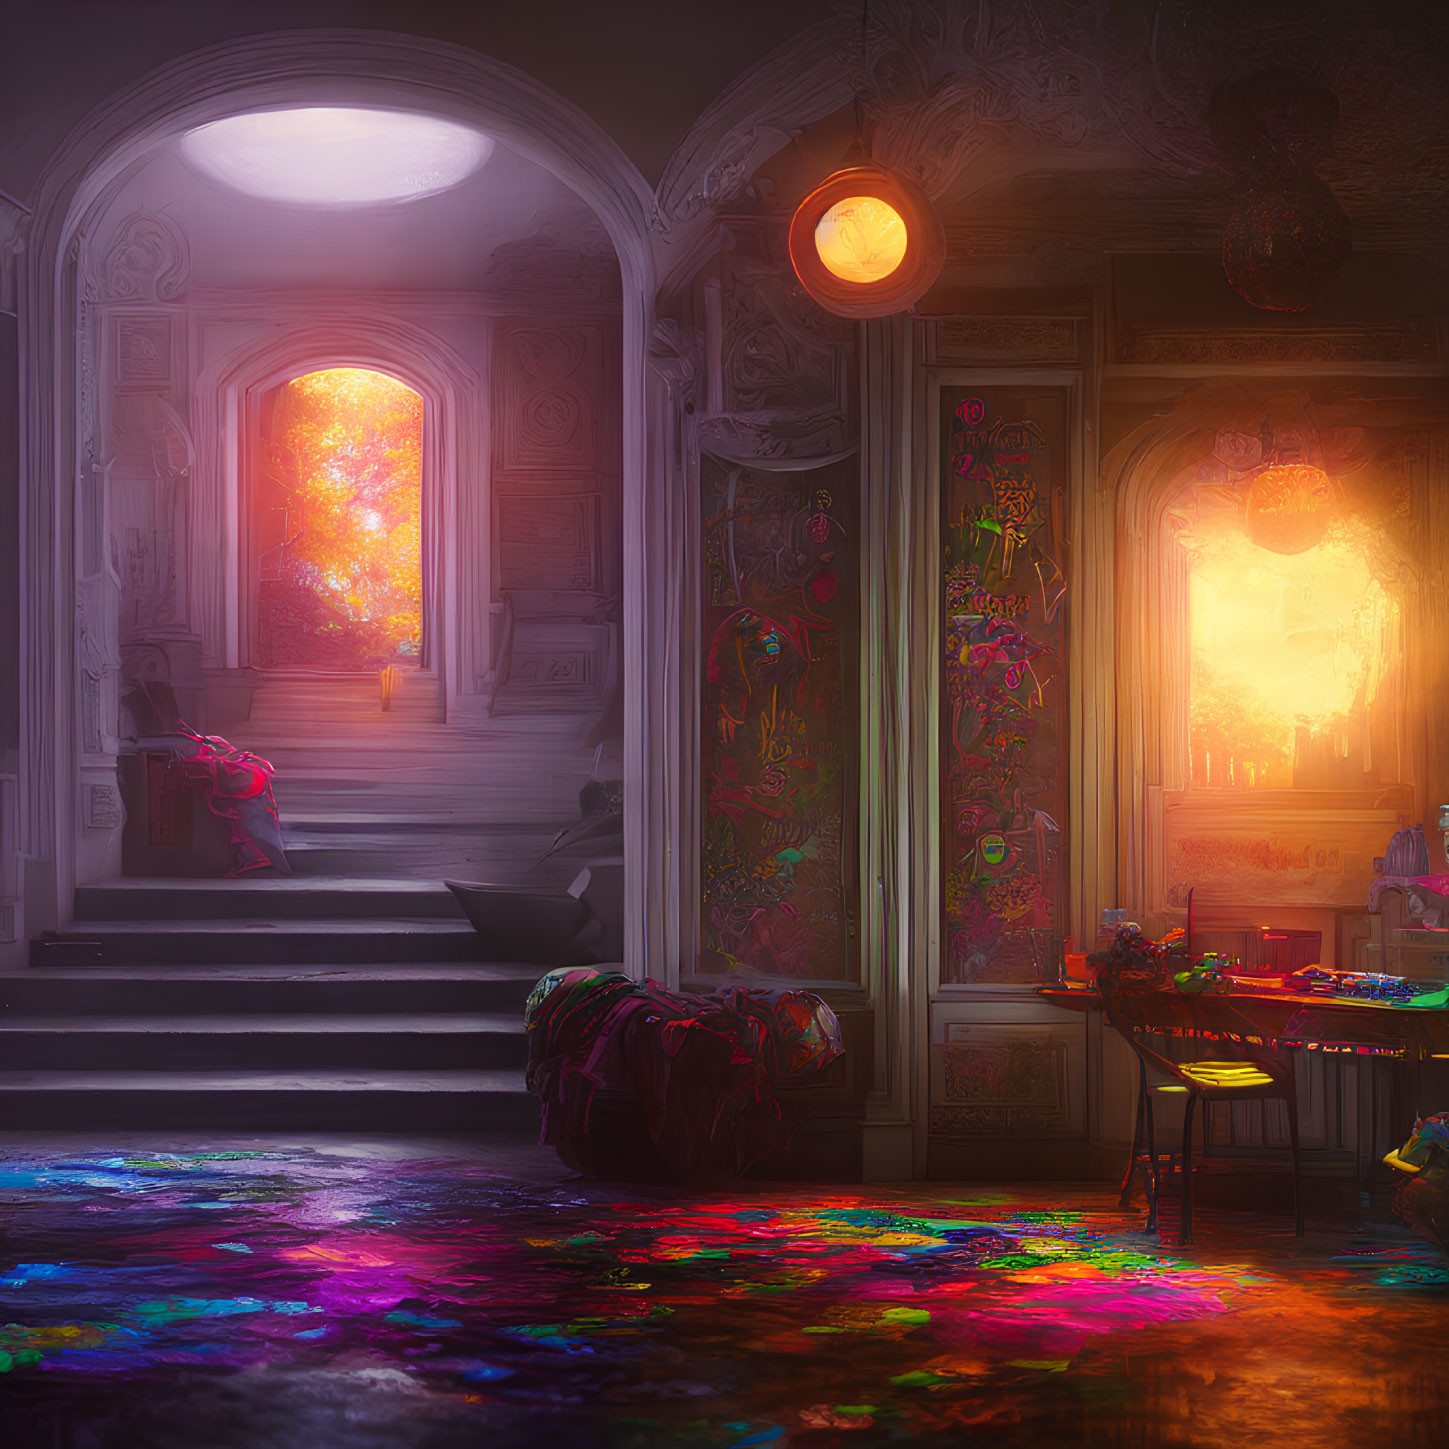 Colorful Graffiti Room with Art Supplies and Glowing Window